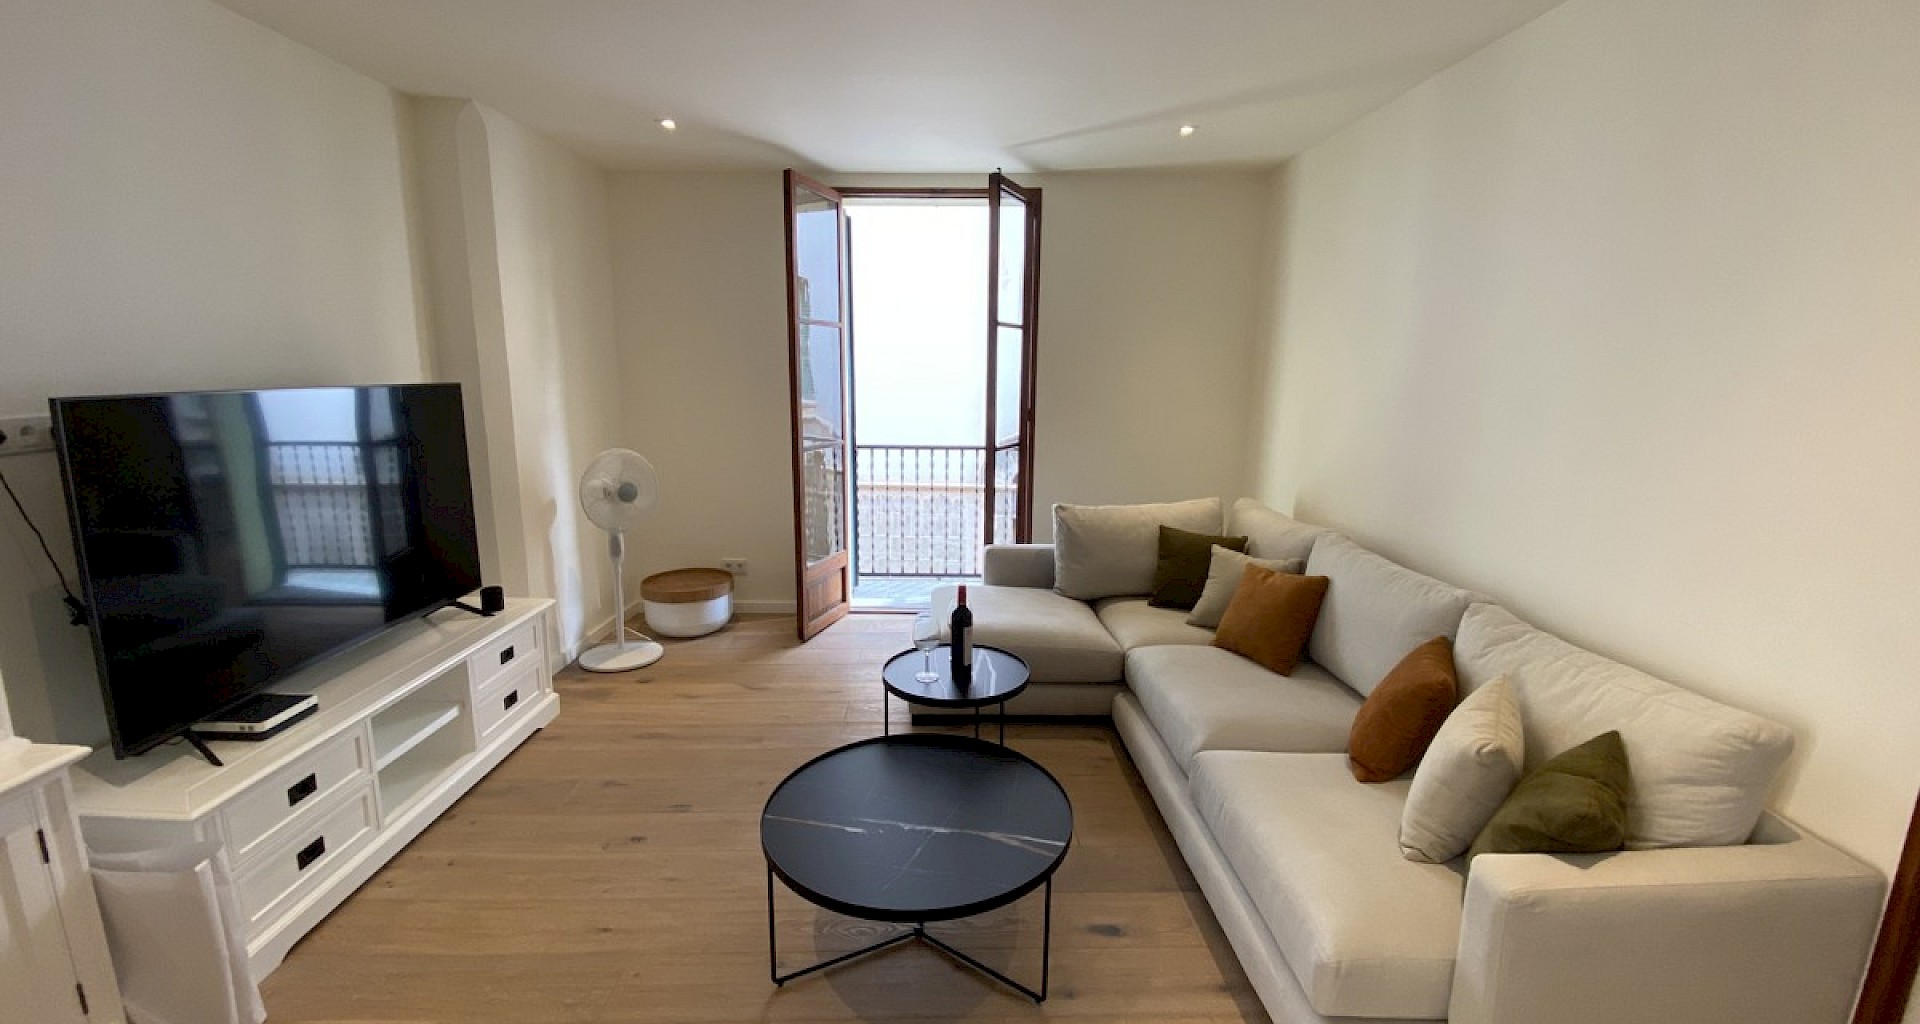 KROHN & LUEDEMANN Modern renovated apartment in Palma old town for sale Wohnung in Palma Altstadt 08